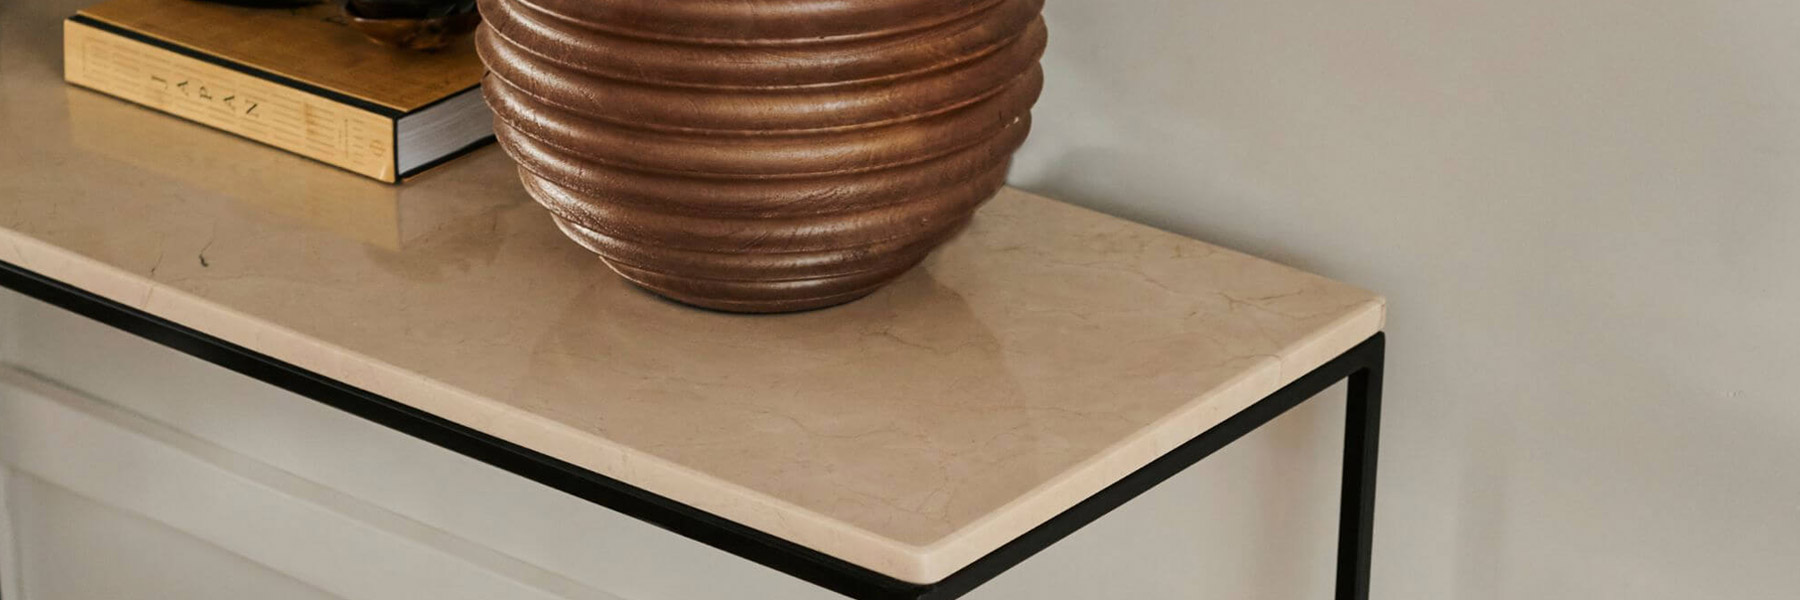 Top 5 accessories for your marble side table